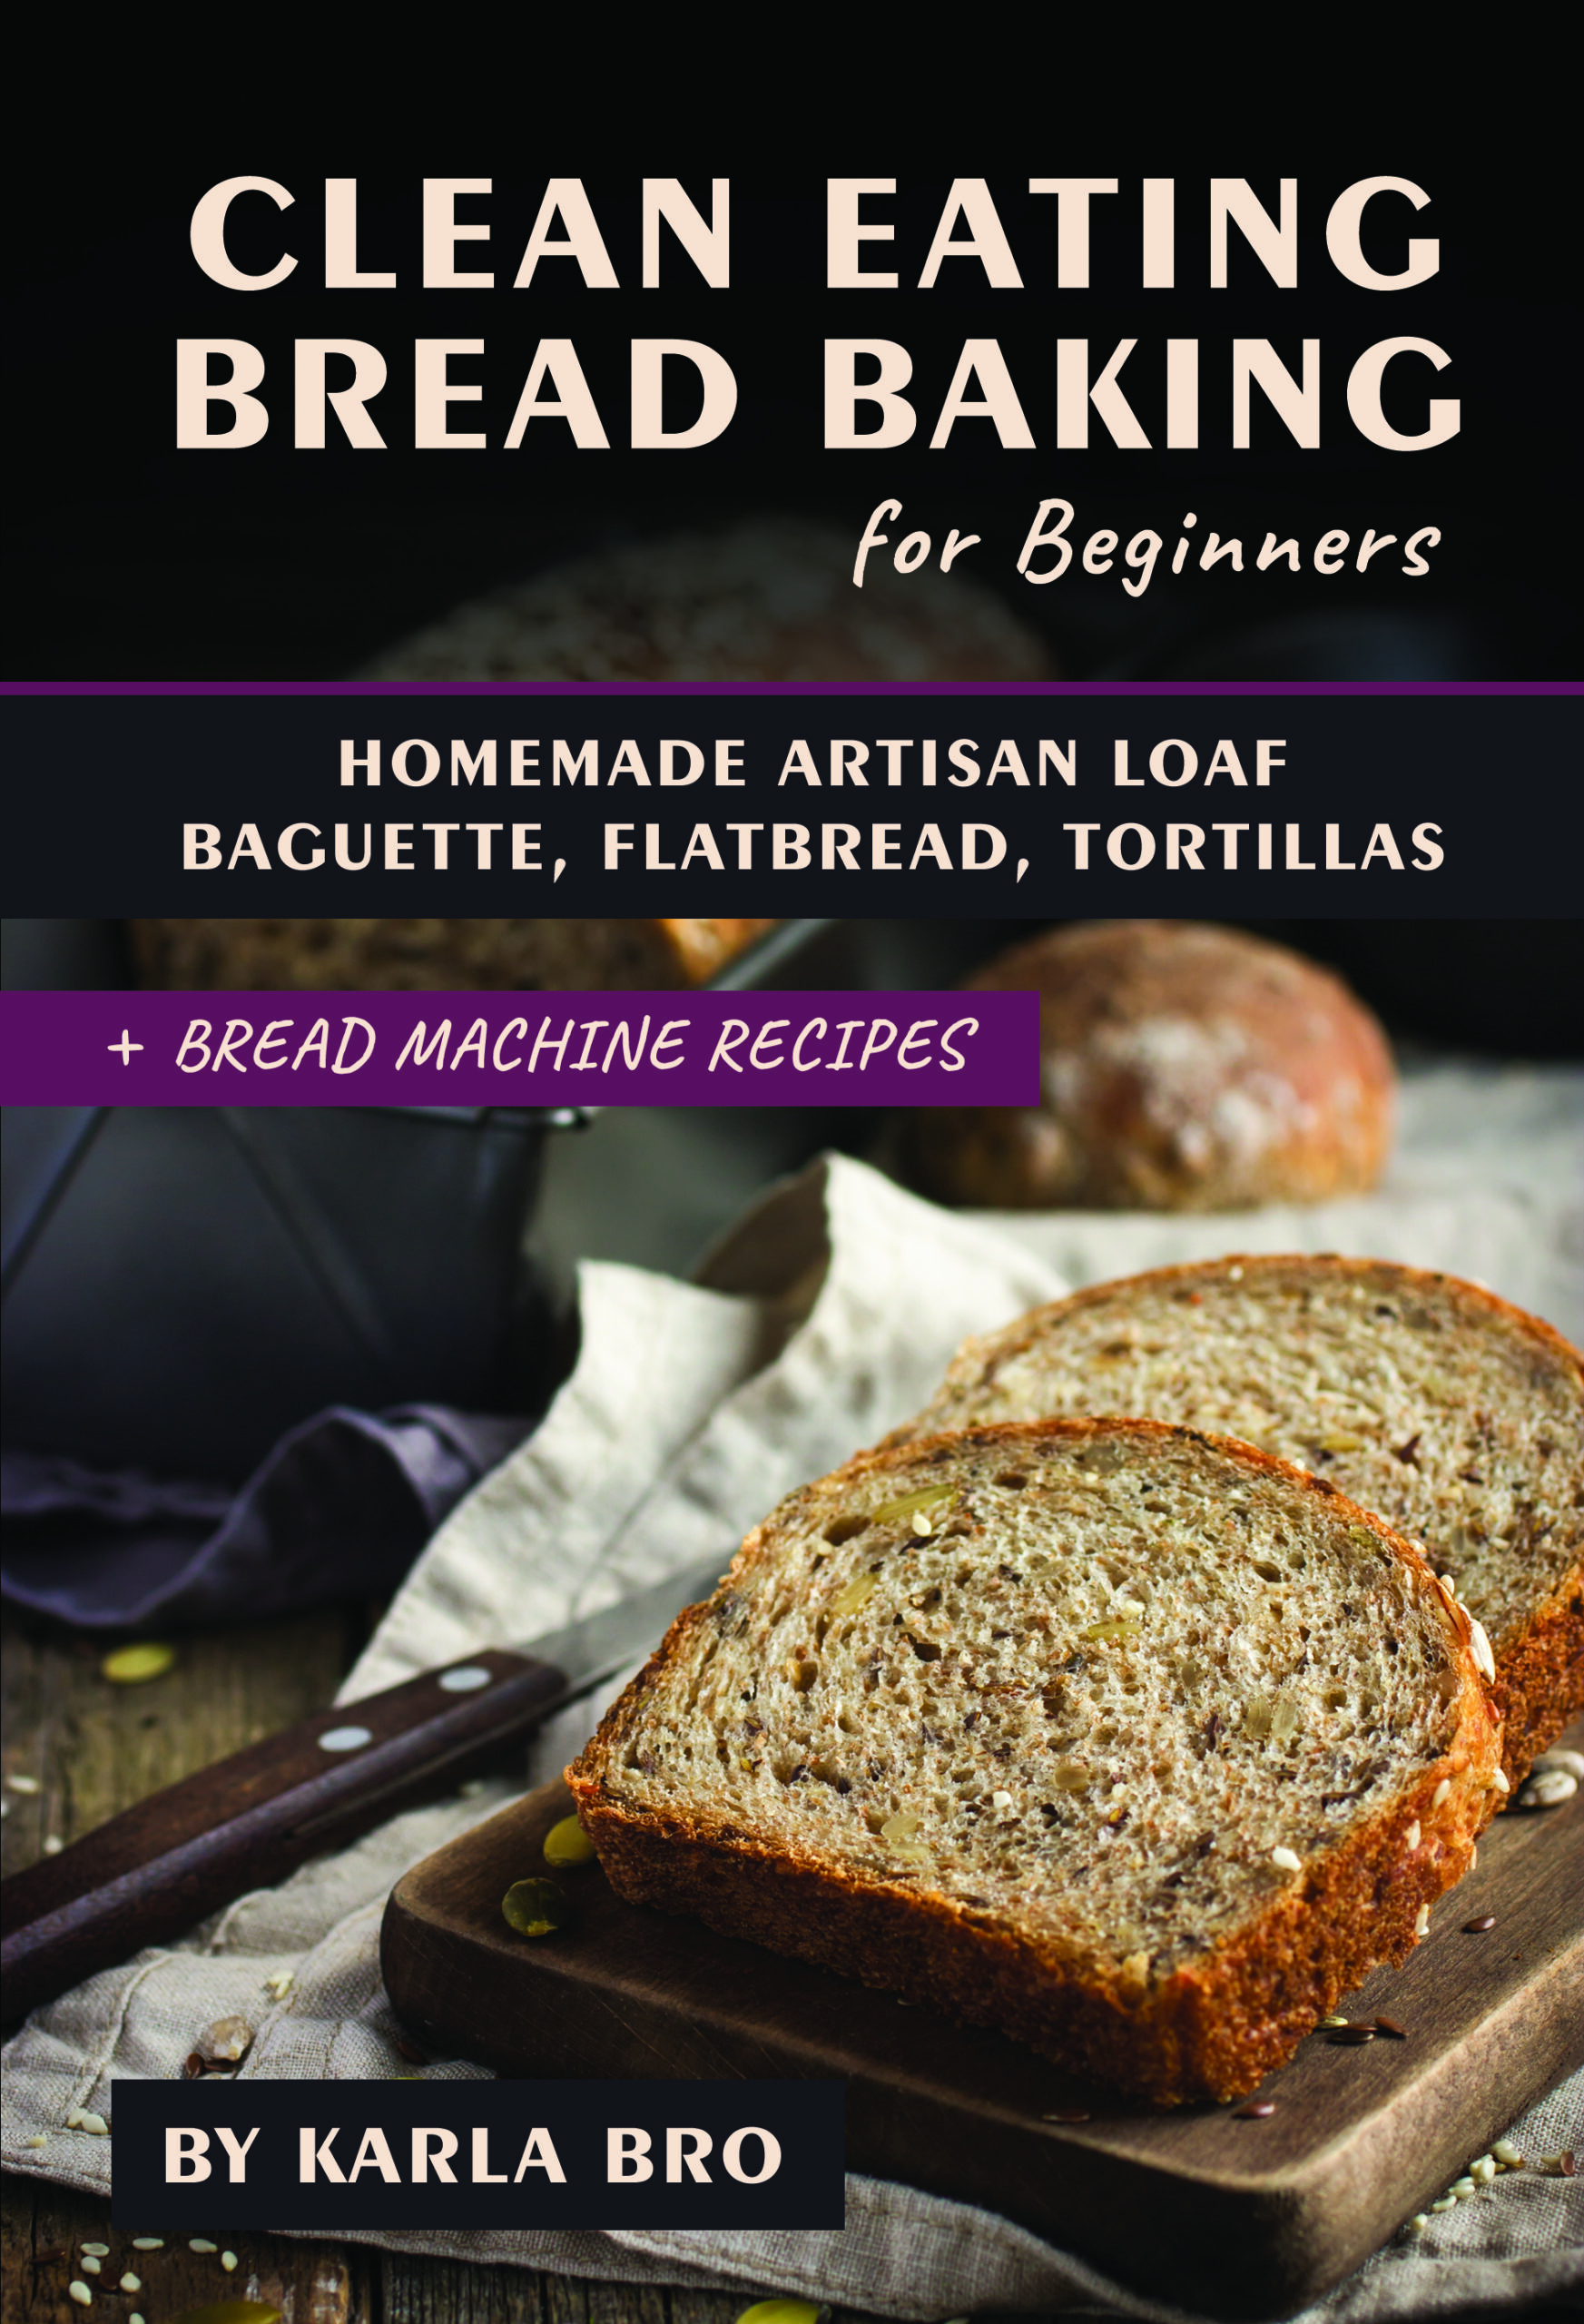 FREE: Clean Eating Bread Baking for Beginners: Homemade Artisan Loaf, Baguette, Flatbread, Tortillas. + Bread Machine Recipes by Karla Bro